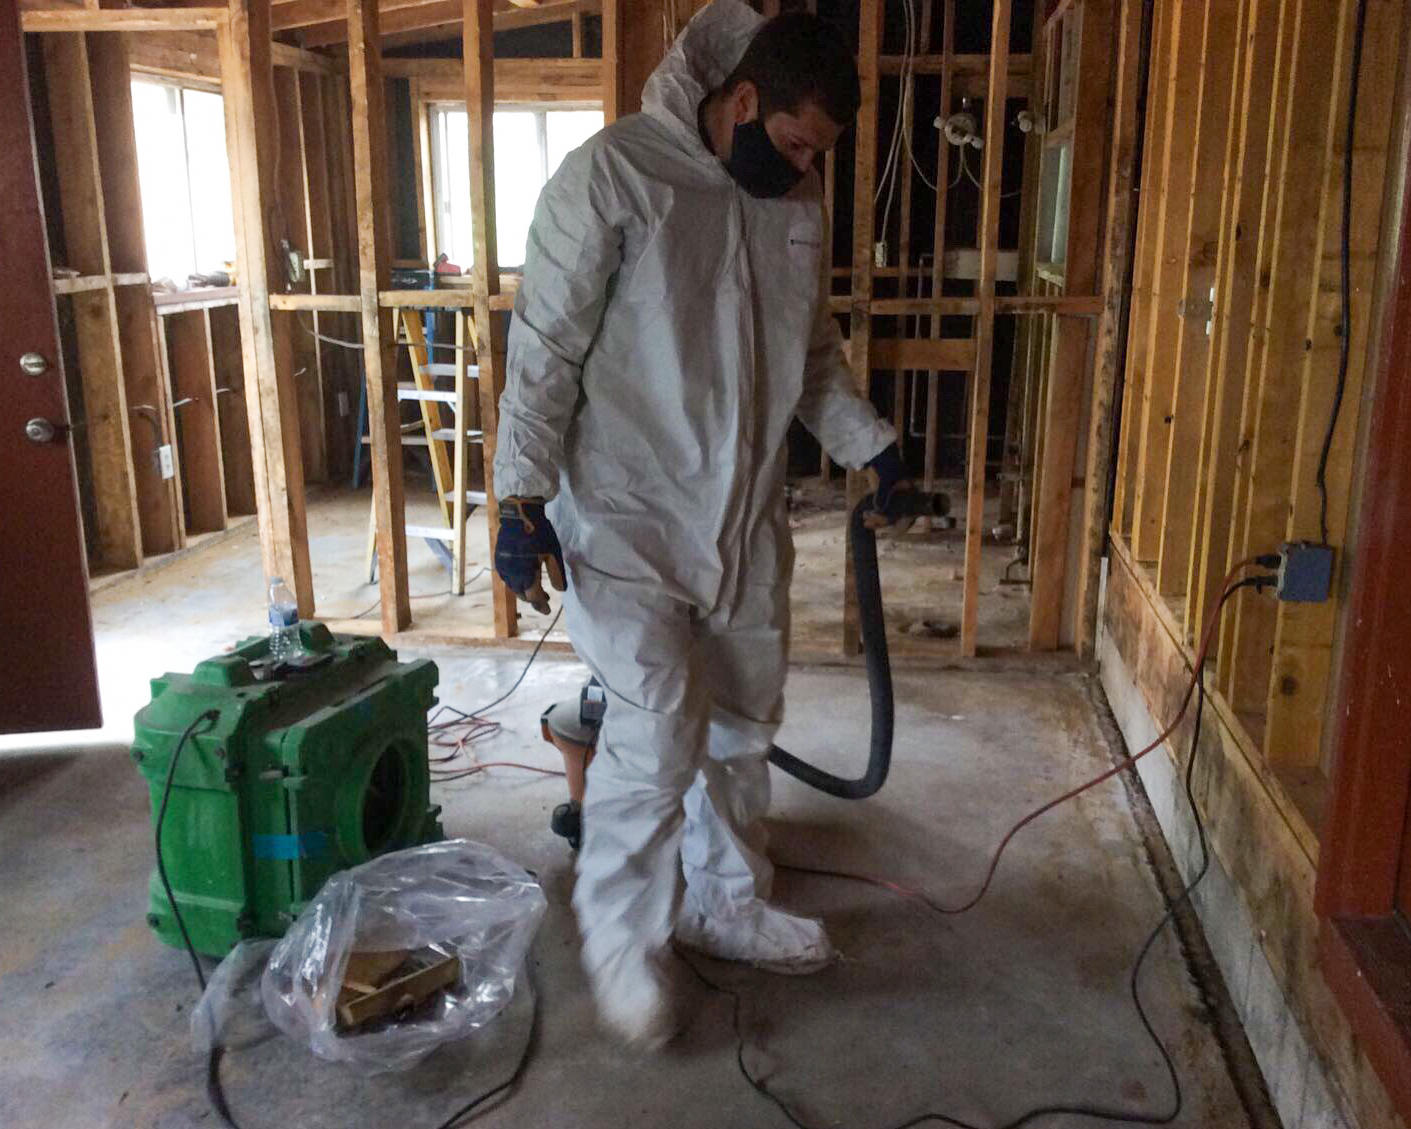 SERVPRO of Northwest Phoenix / Anthem is the premier choice in helping you with any mold restoration emergency in Phoenix, AZ. We are highly trained and qualified to respond to any size  mold remediation emergency or cleaning services. Call us!